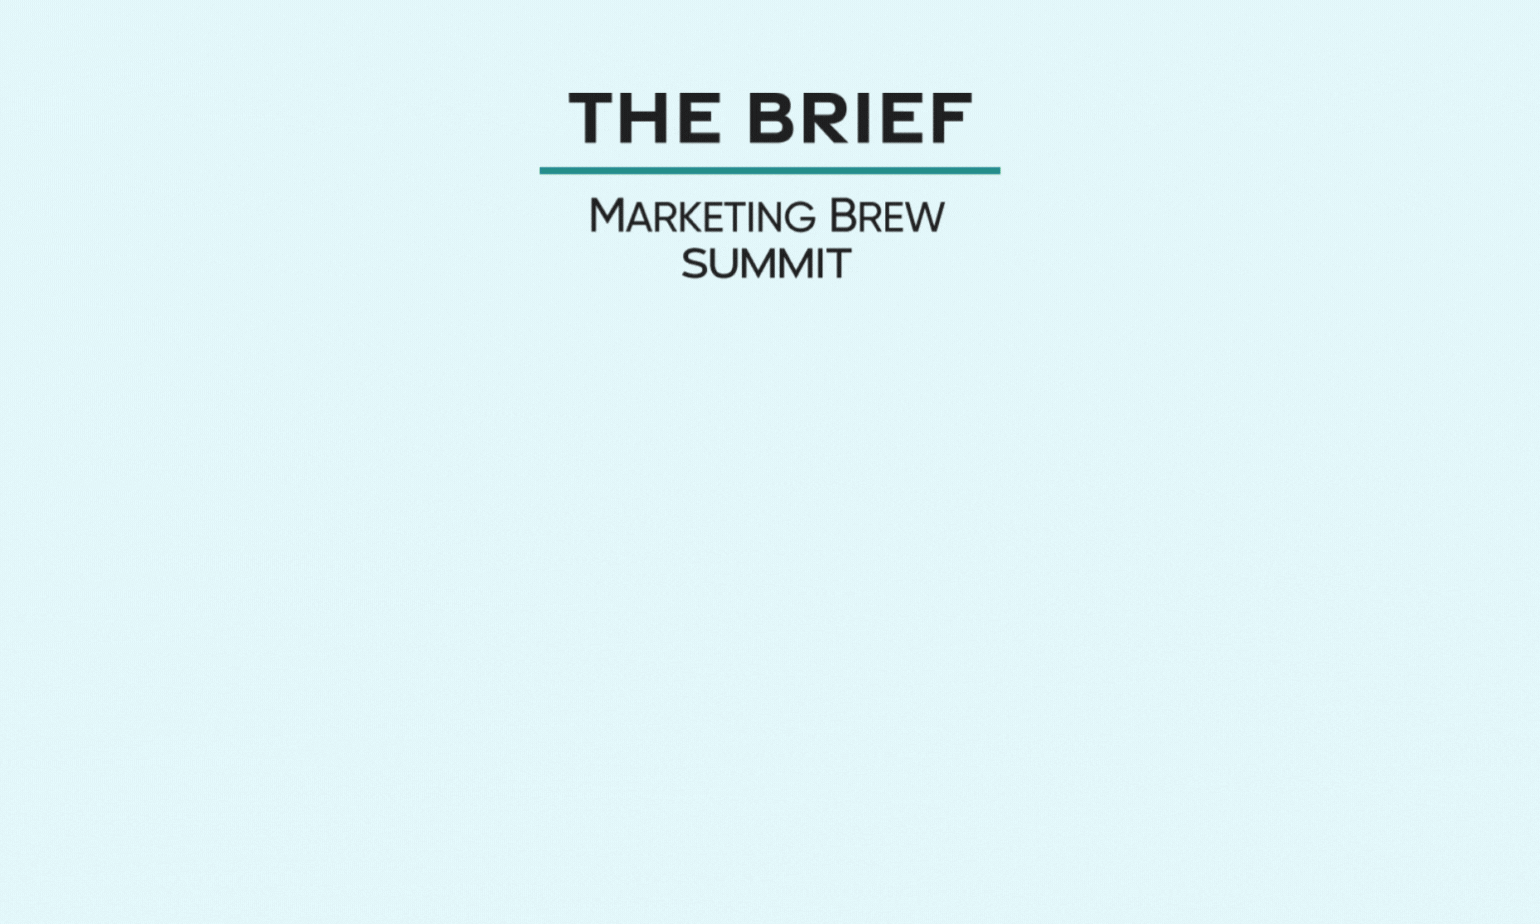 Animated gif of Marketing Brew's The Brief summit event logo and branding